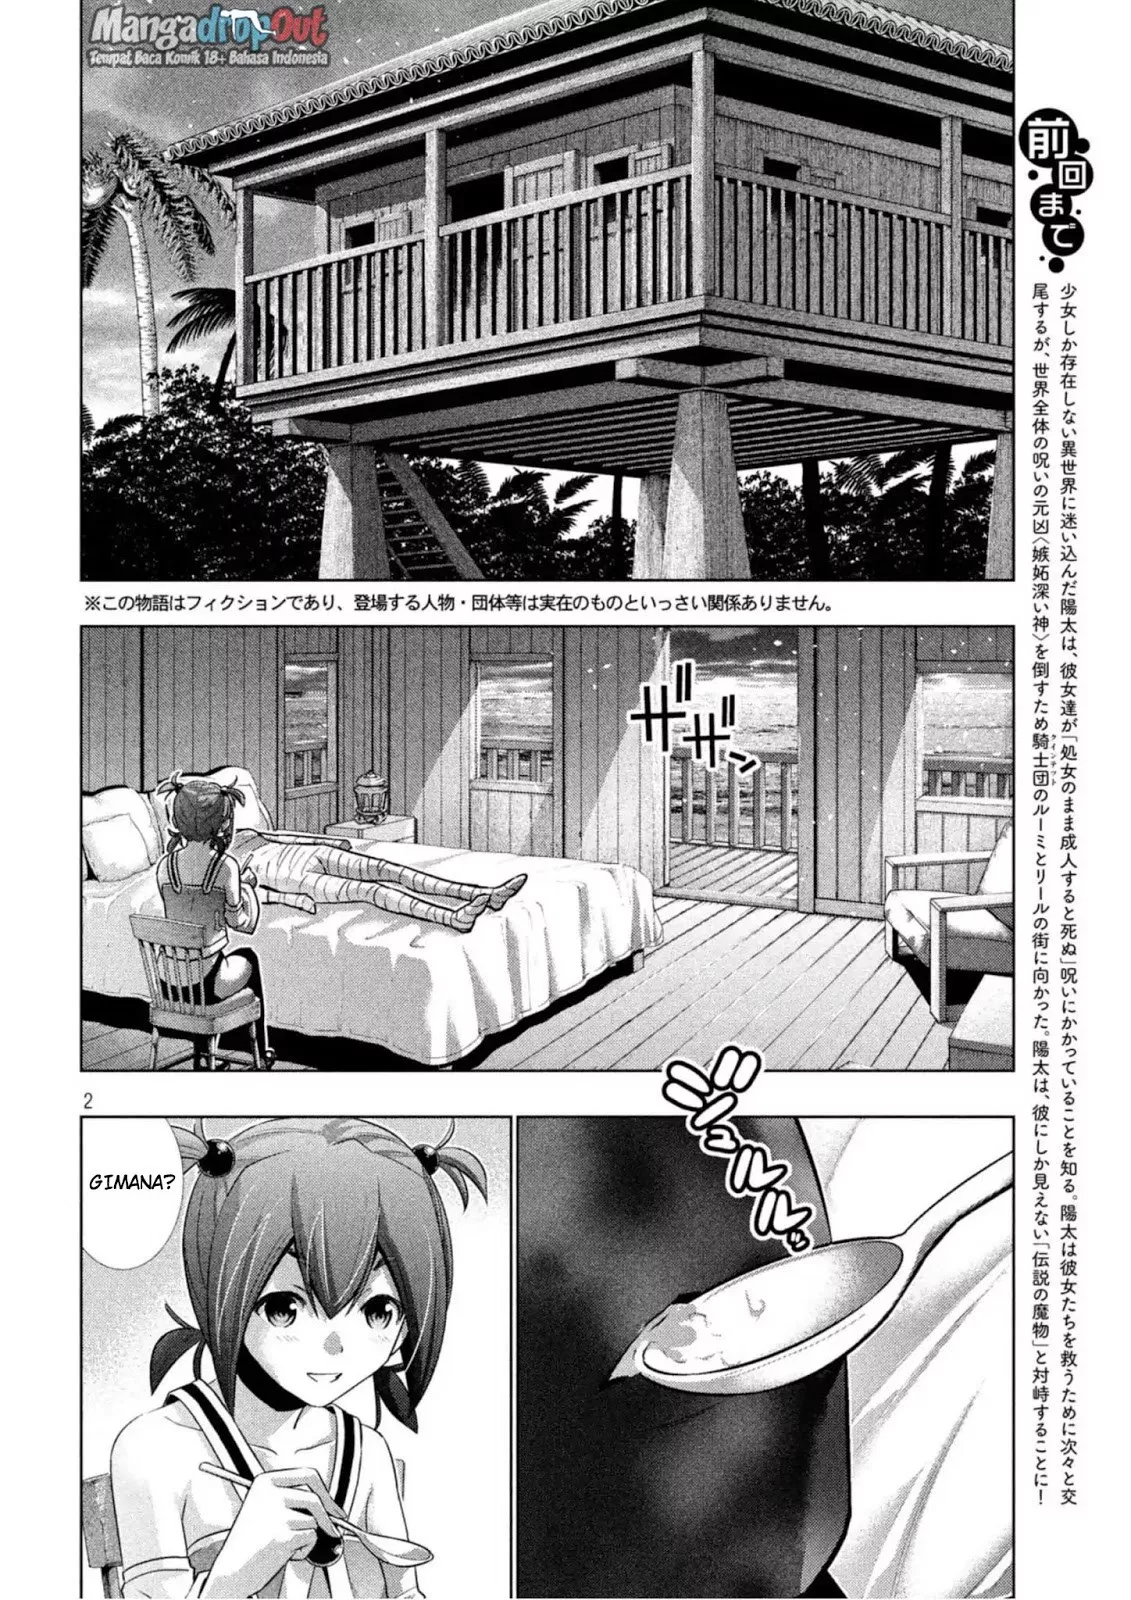 Parallel Paradise Chapter 35